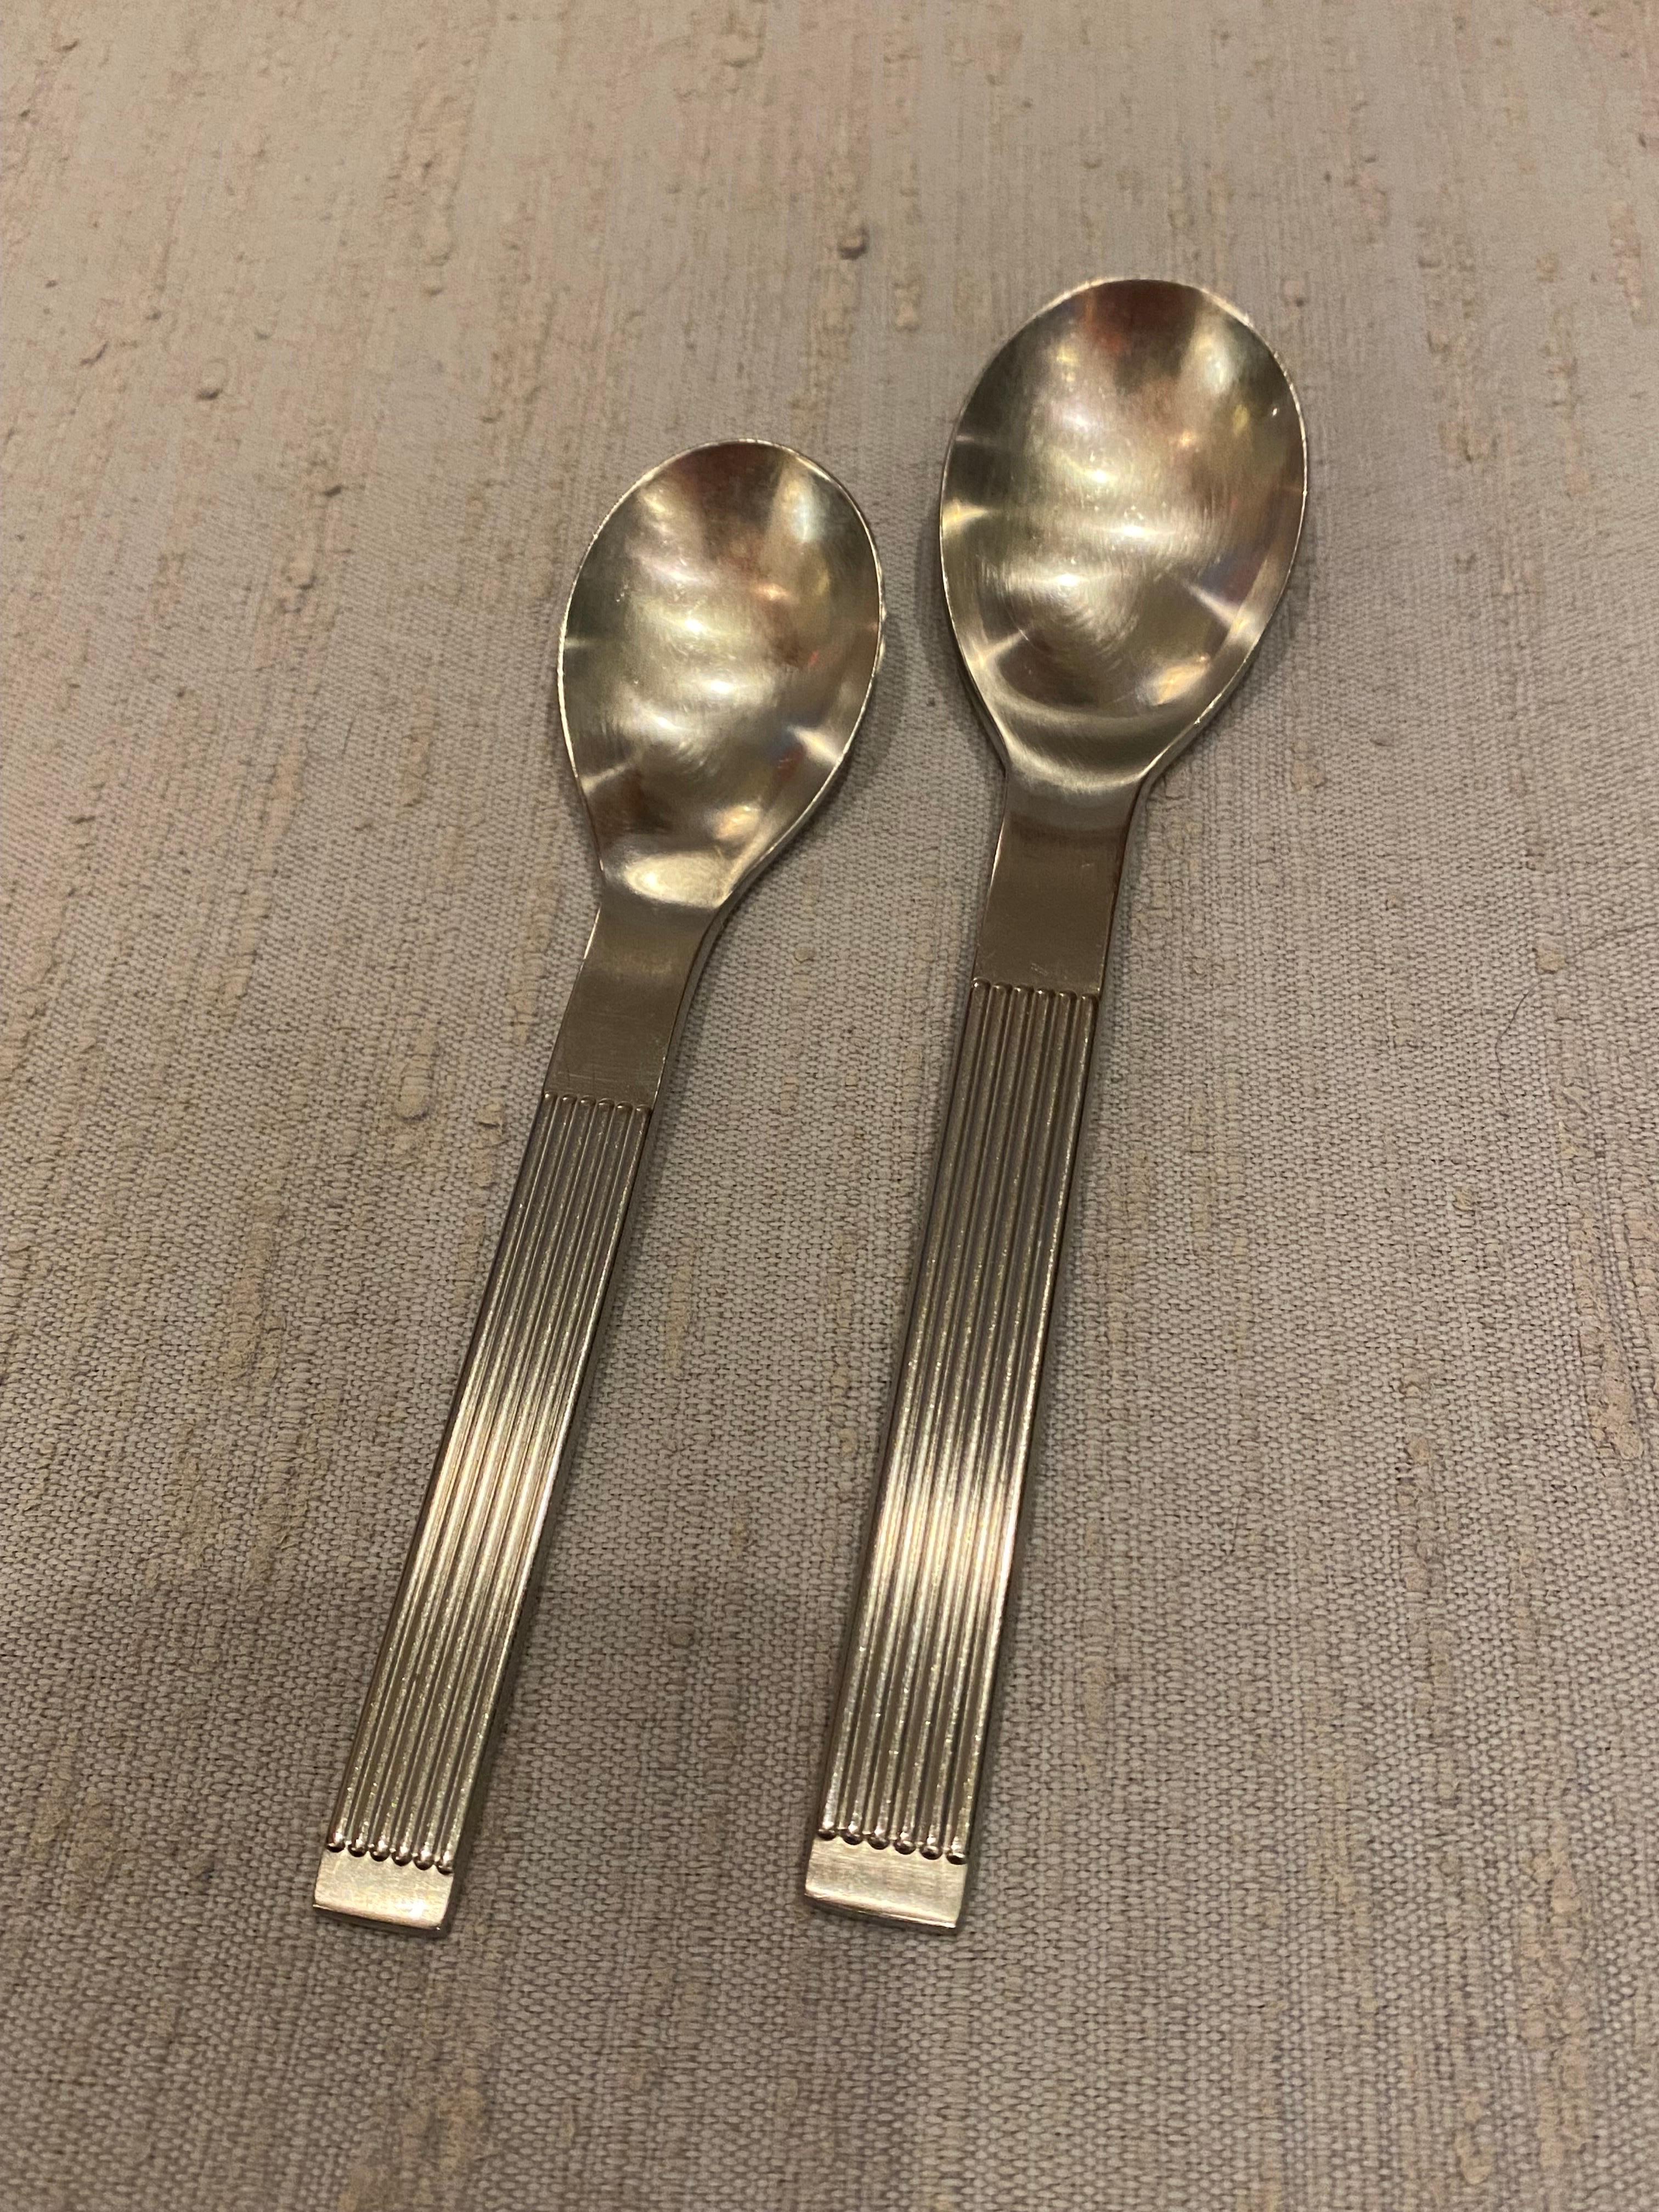 Late 20th Century Dansk “Thebe” Flatware Set, Service for 10